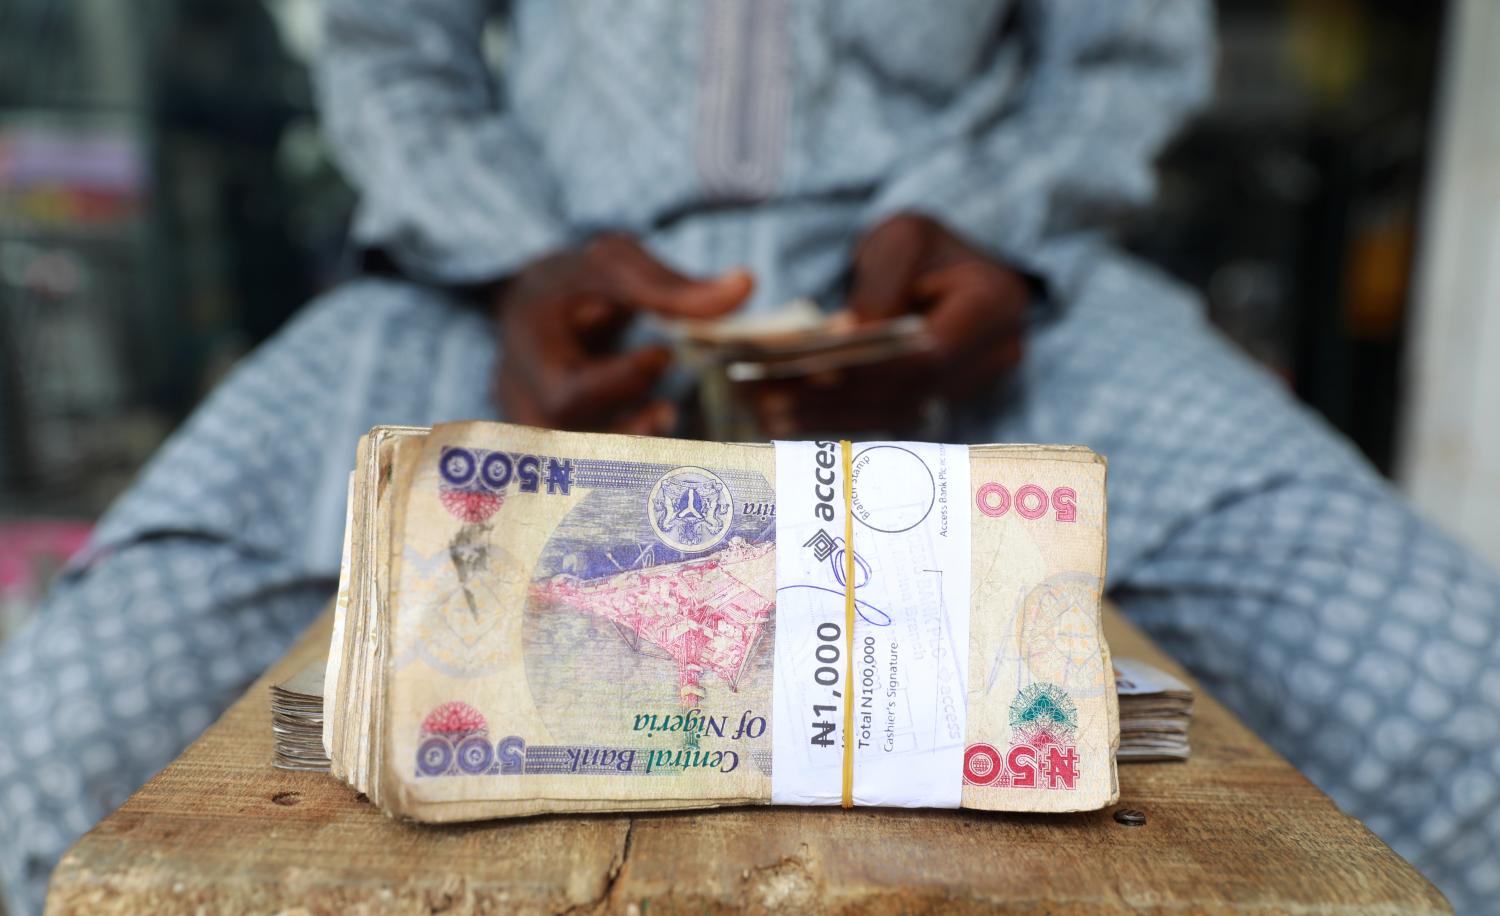 A money changer counts Nigerian currency notes for a customer in Nigeria's commercial capital, Lagos, Nigeria March 16, 2020. REUTERS/Temilade Adelaja